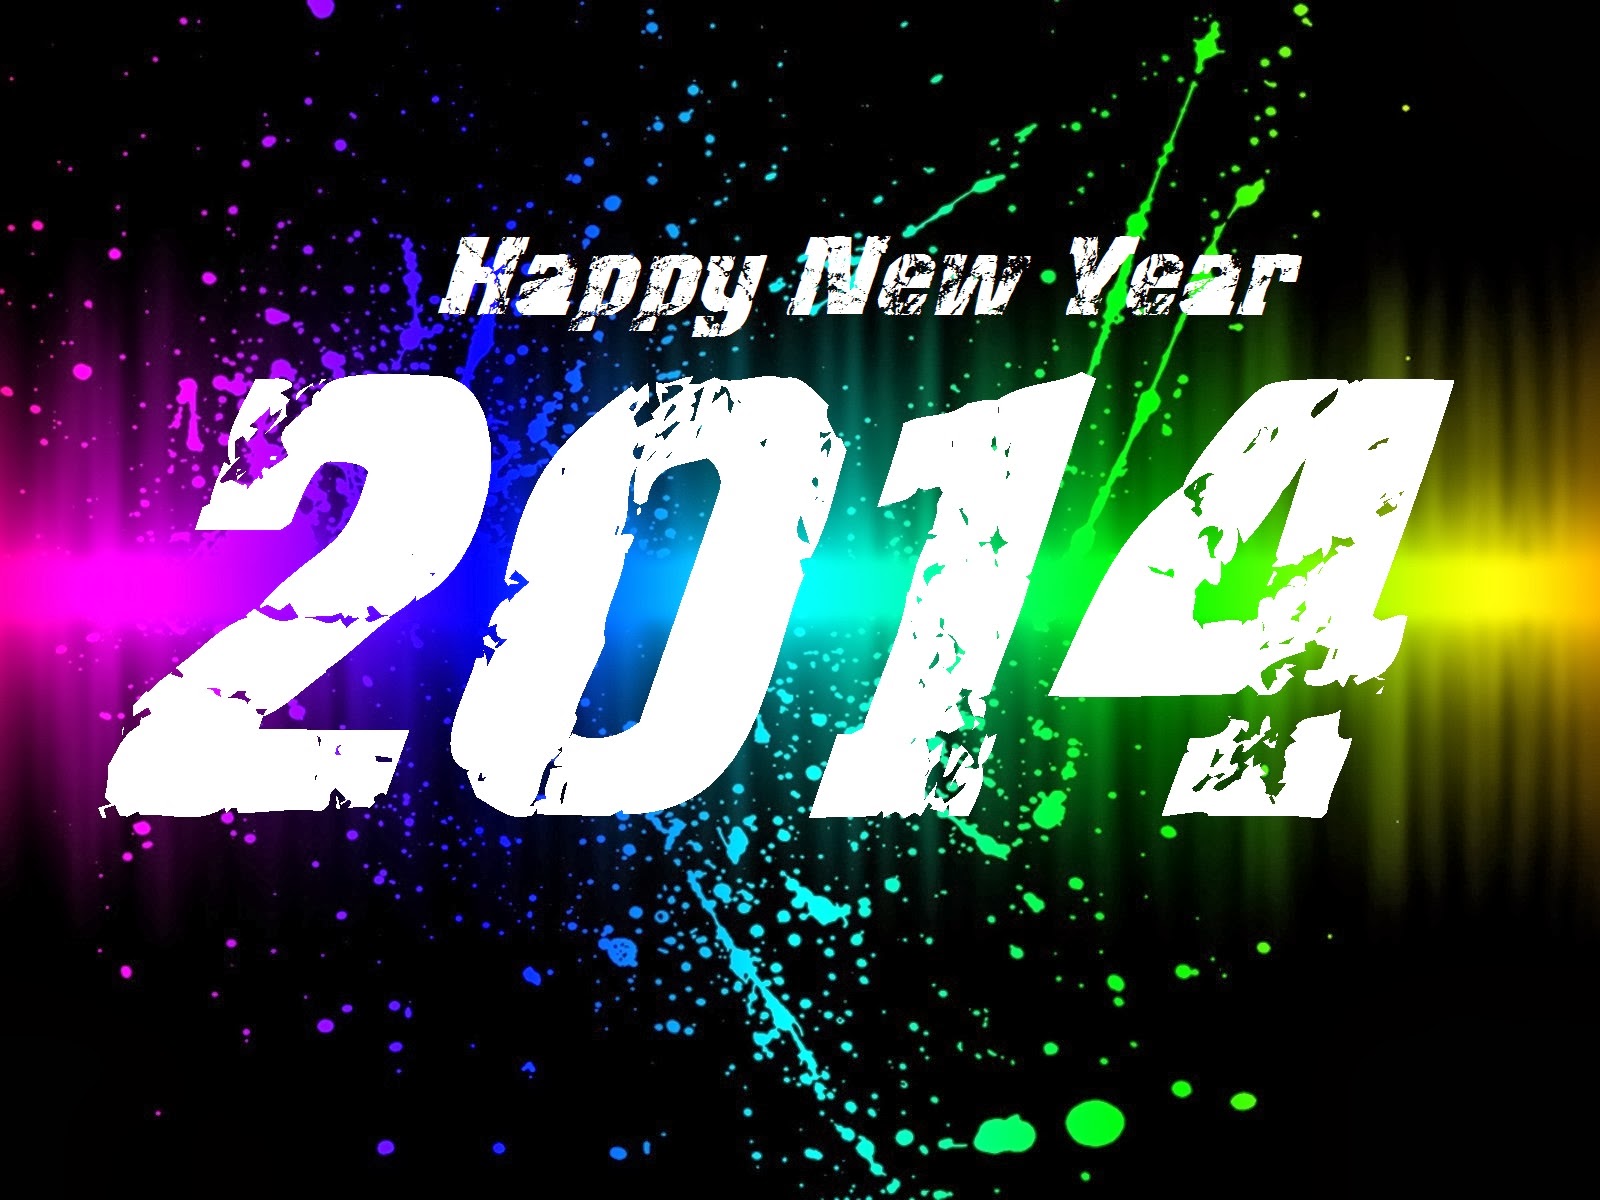 New Year 2014 HD Graphics Colorful Photo's Images | Festival Chaska
